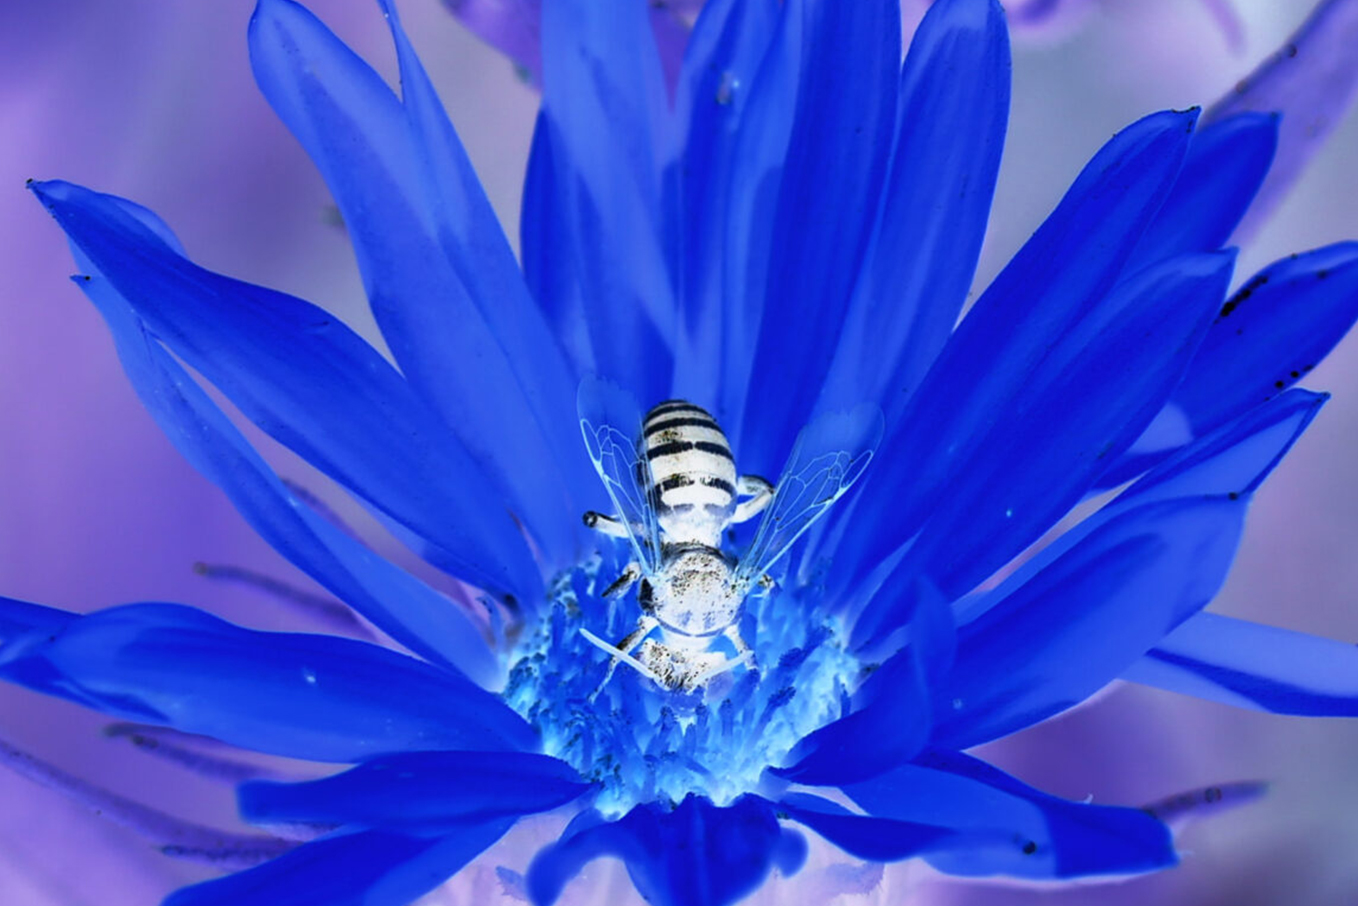 A photo negative of a bee in a flower.